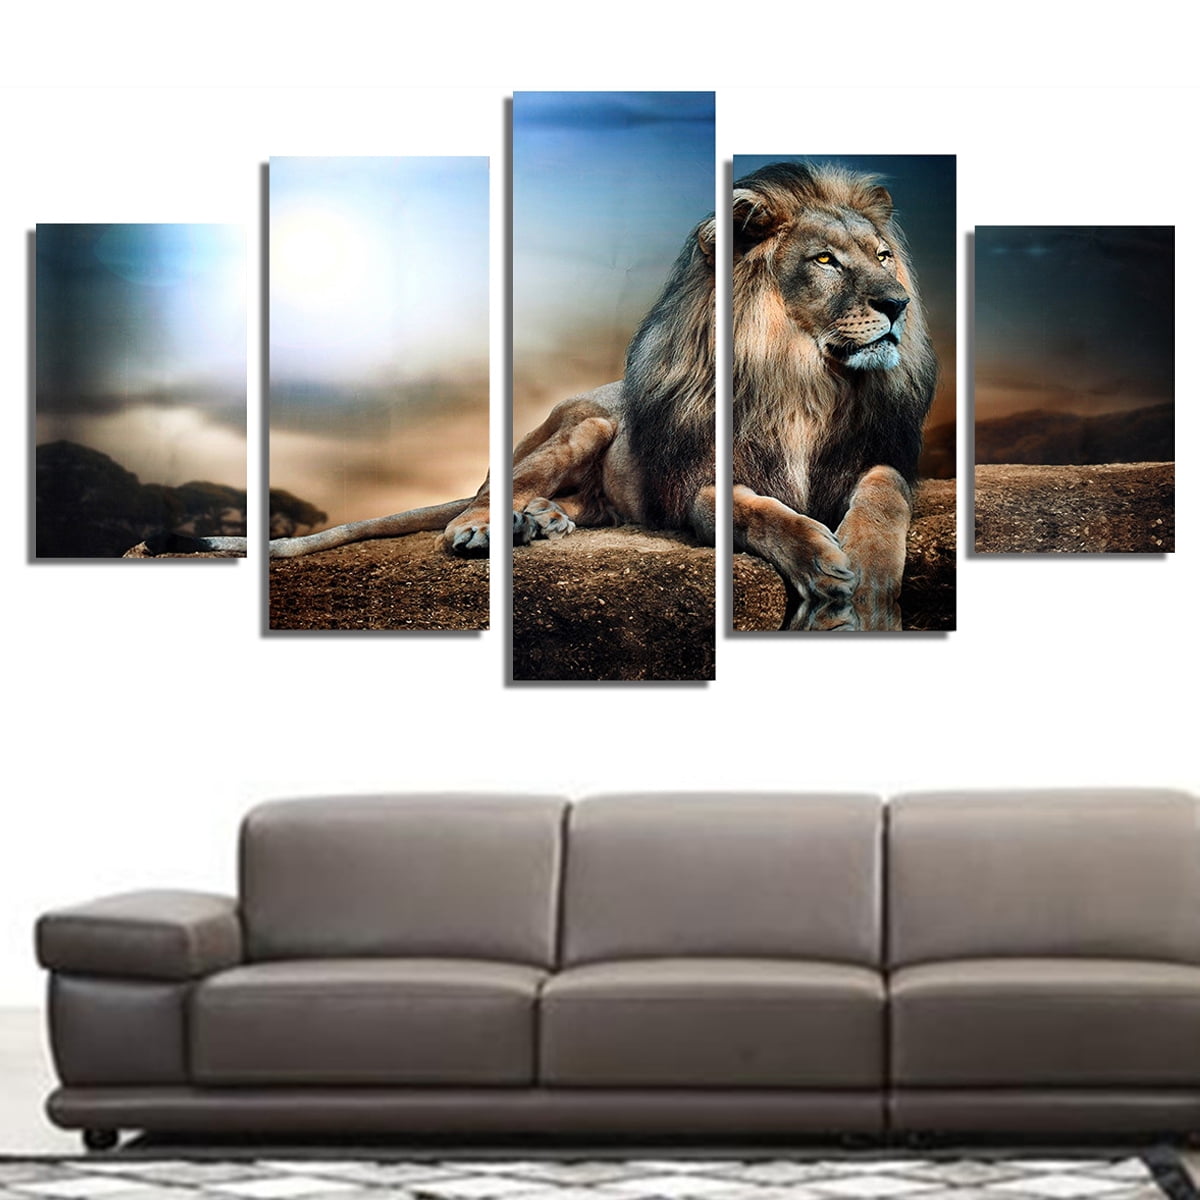 5Pcs/Set Modern Abstract Canvas Print Painting Picture Wall Mural Decor Unframed 